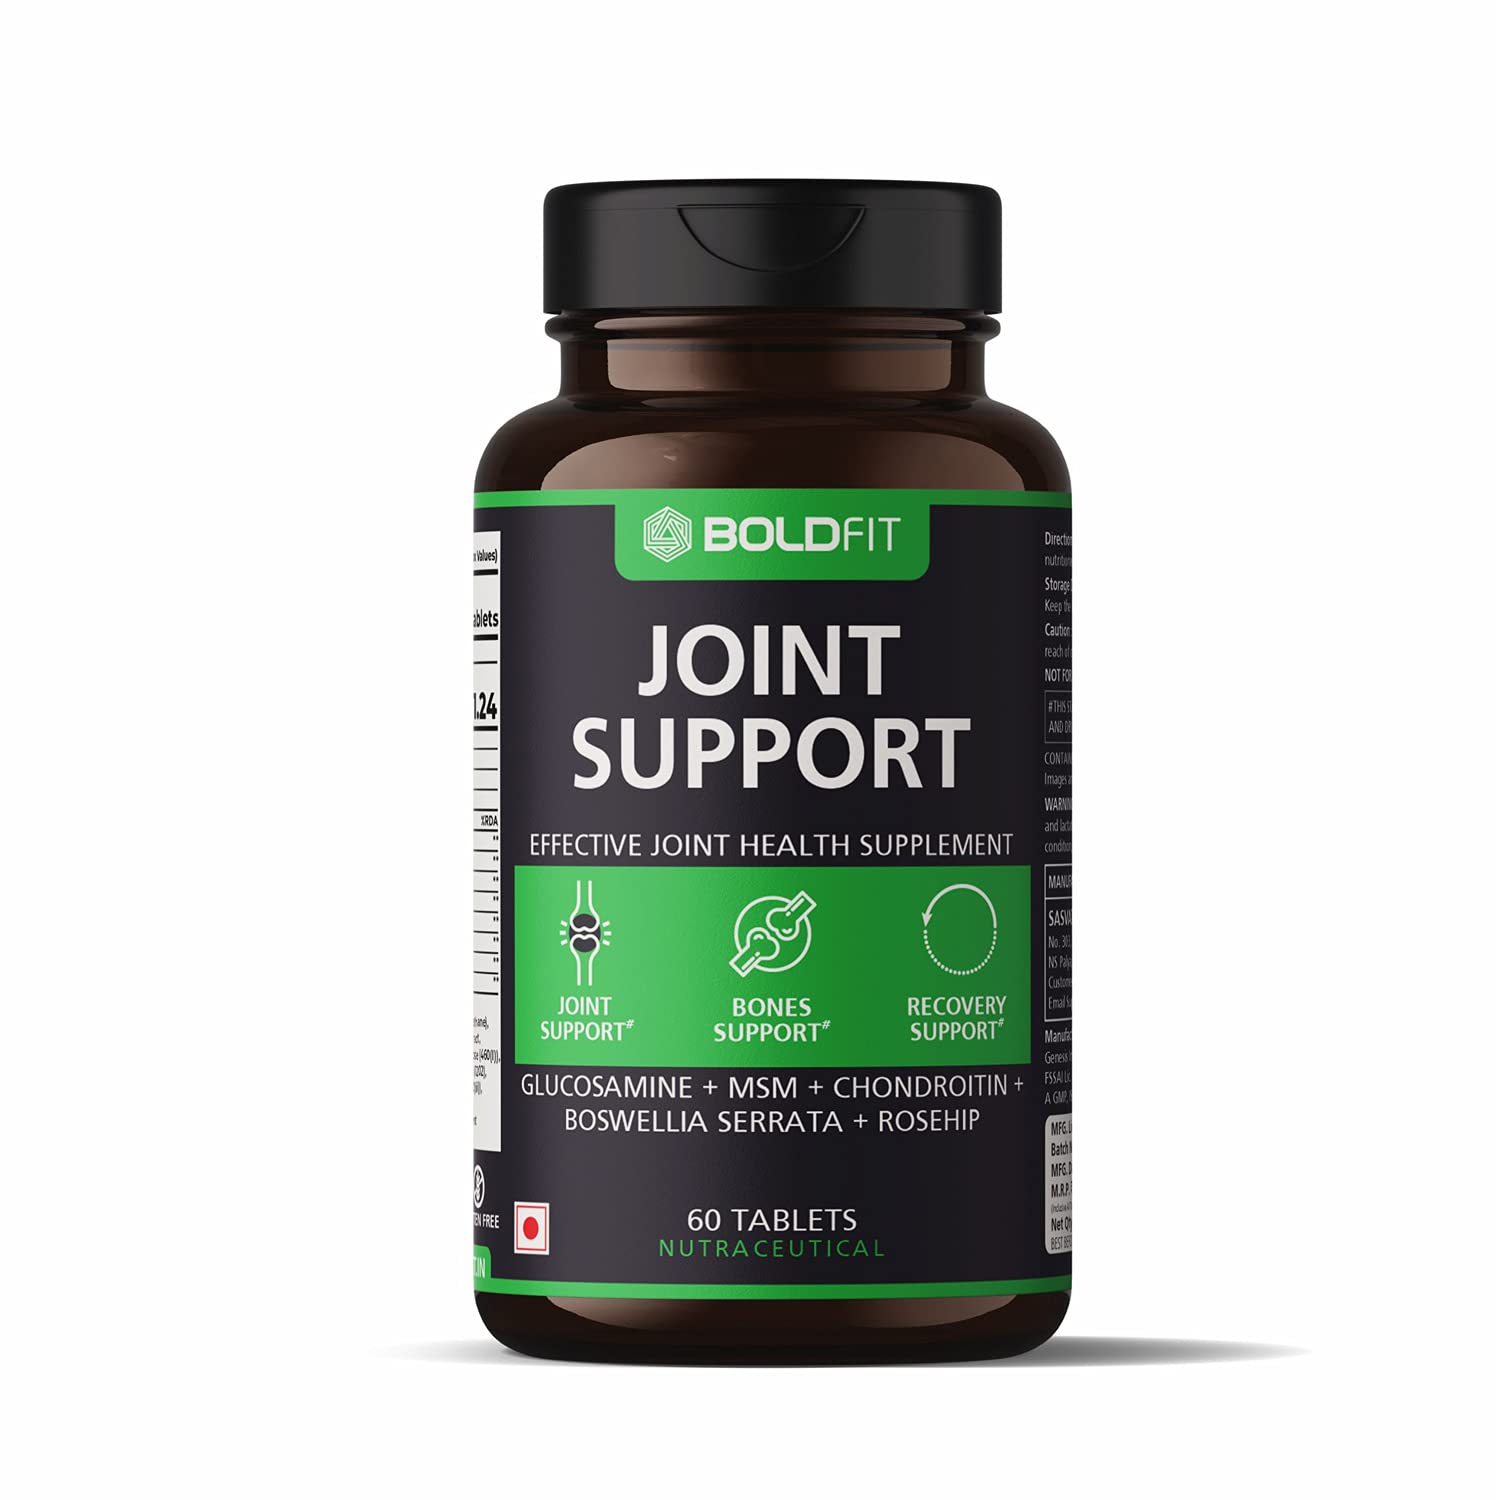 Bold Fit Joint Support Supplement Image